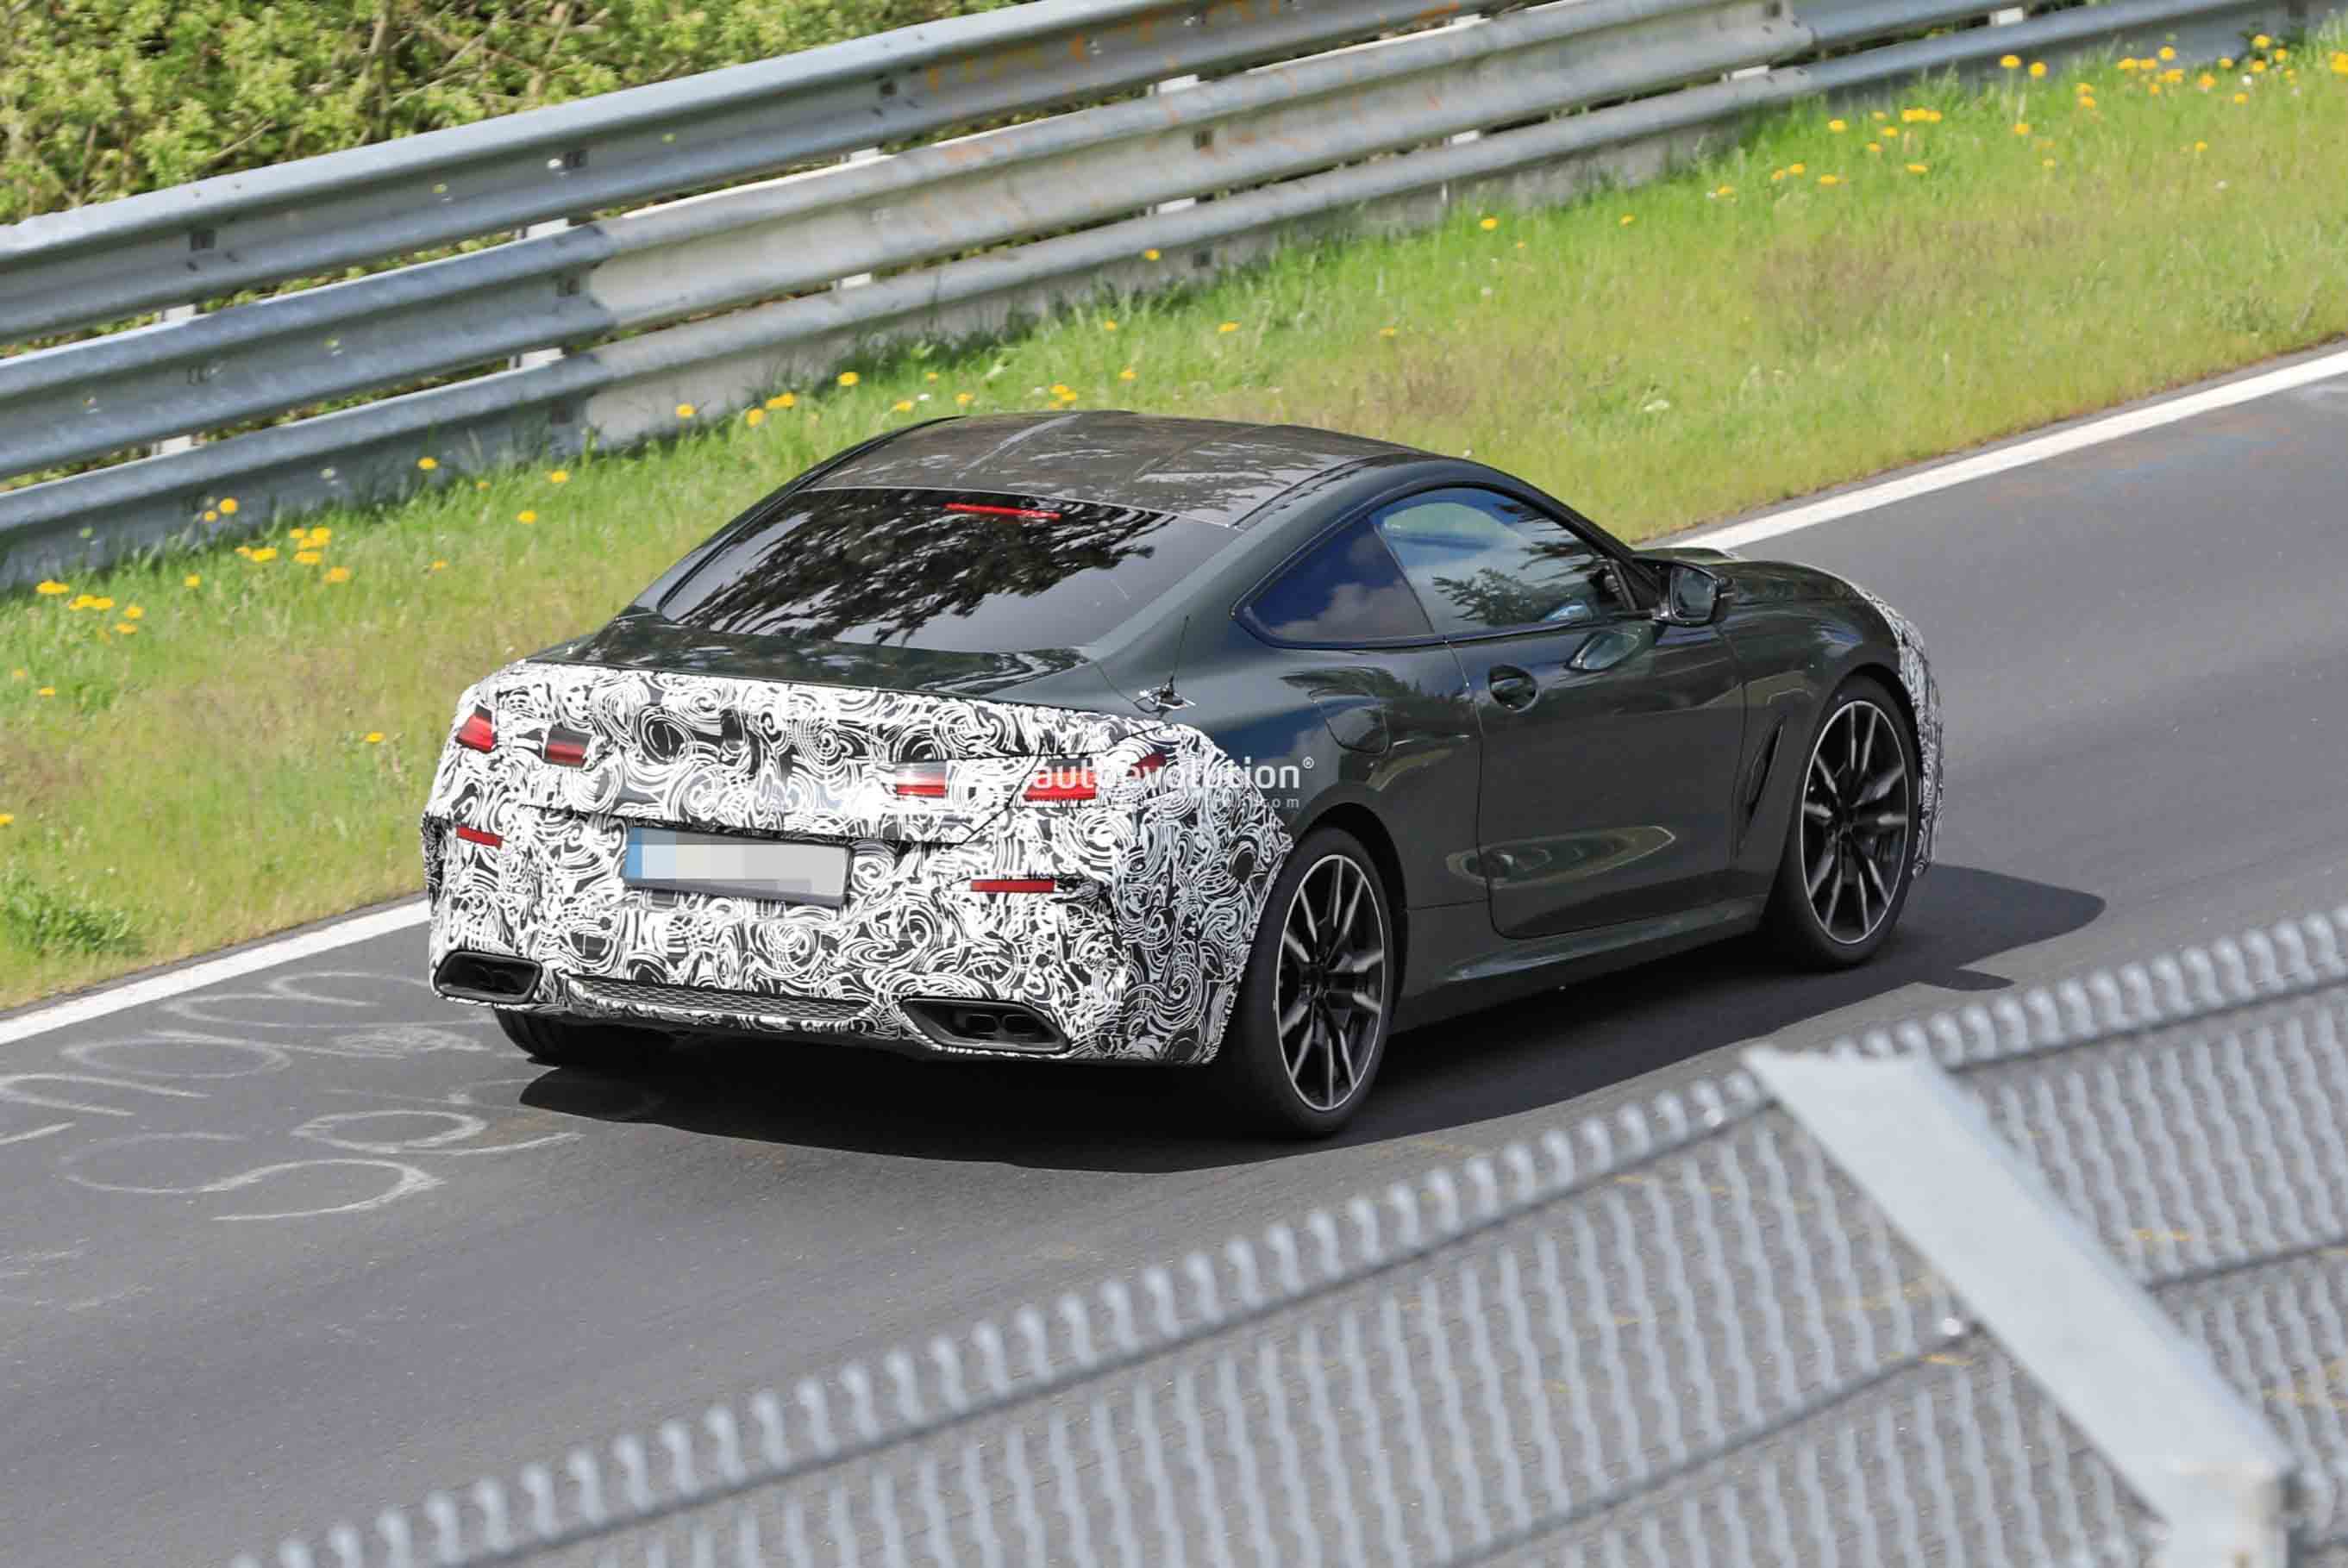 The Facelifted 2023 BMW 8 Series Spy Shots